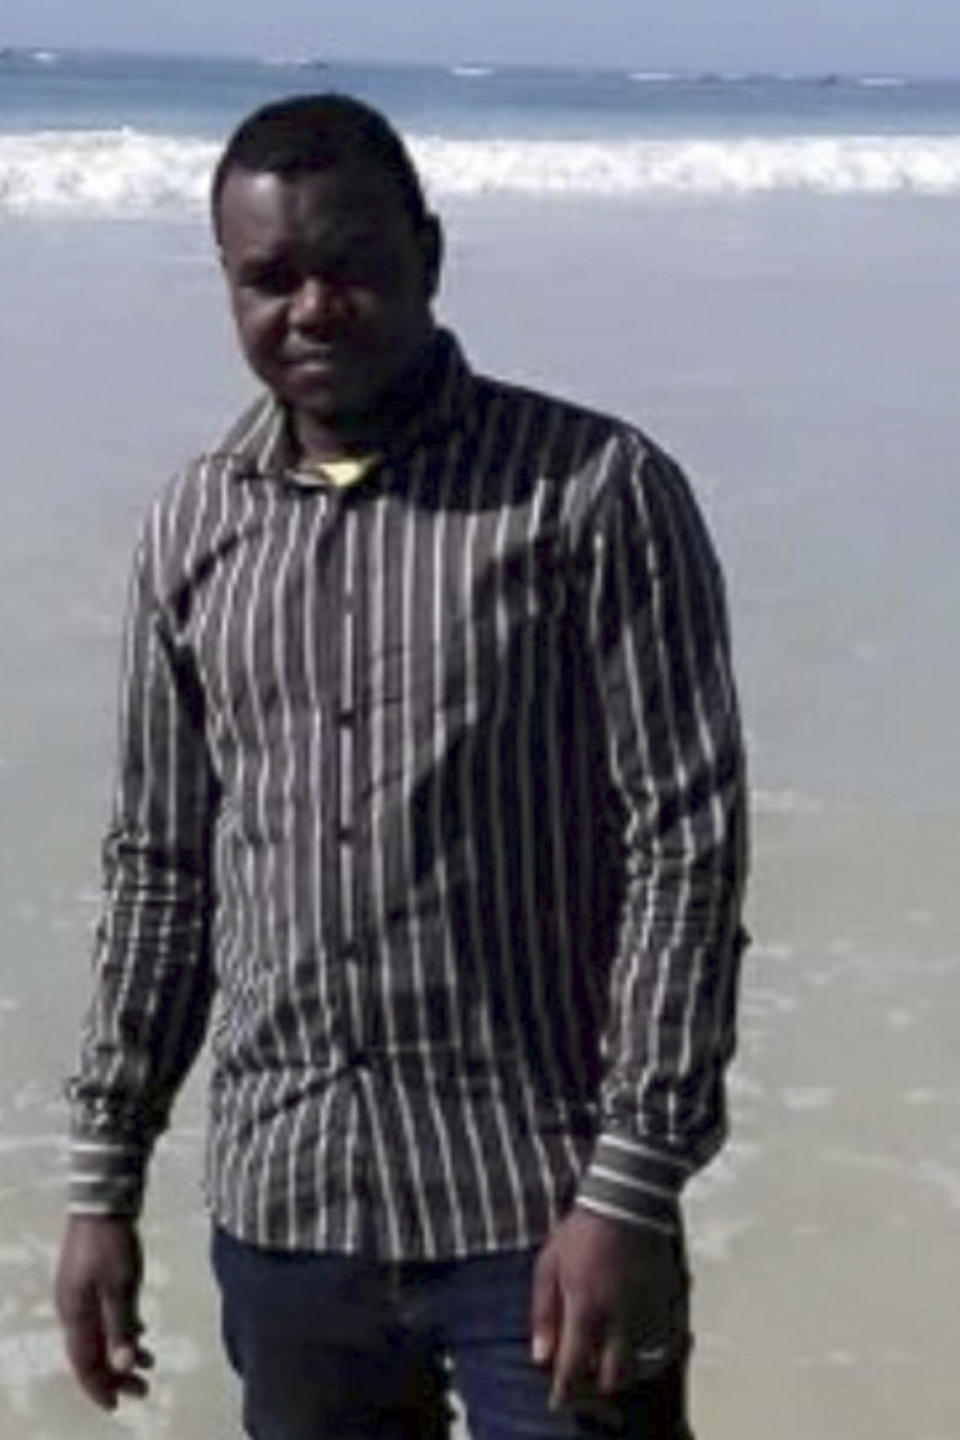 This undated photo provided by his family shows Alassane Sow on the beach in Nouakchott, Mauritania. Sow went missing on the night of Jan. 12, 2021, after boarding a boat from Mauritania in an attempt to reach Europe's Canary Islands. His body was found more than four months later near Trinidad and Tobago, after his boat drifted across the Atlantic. (Family photo via AP)